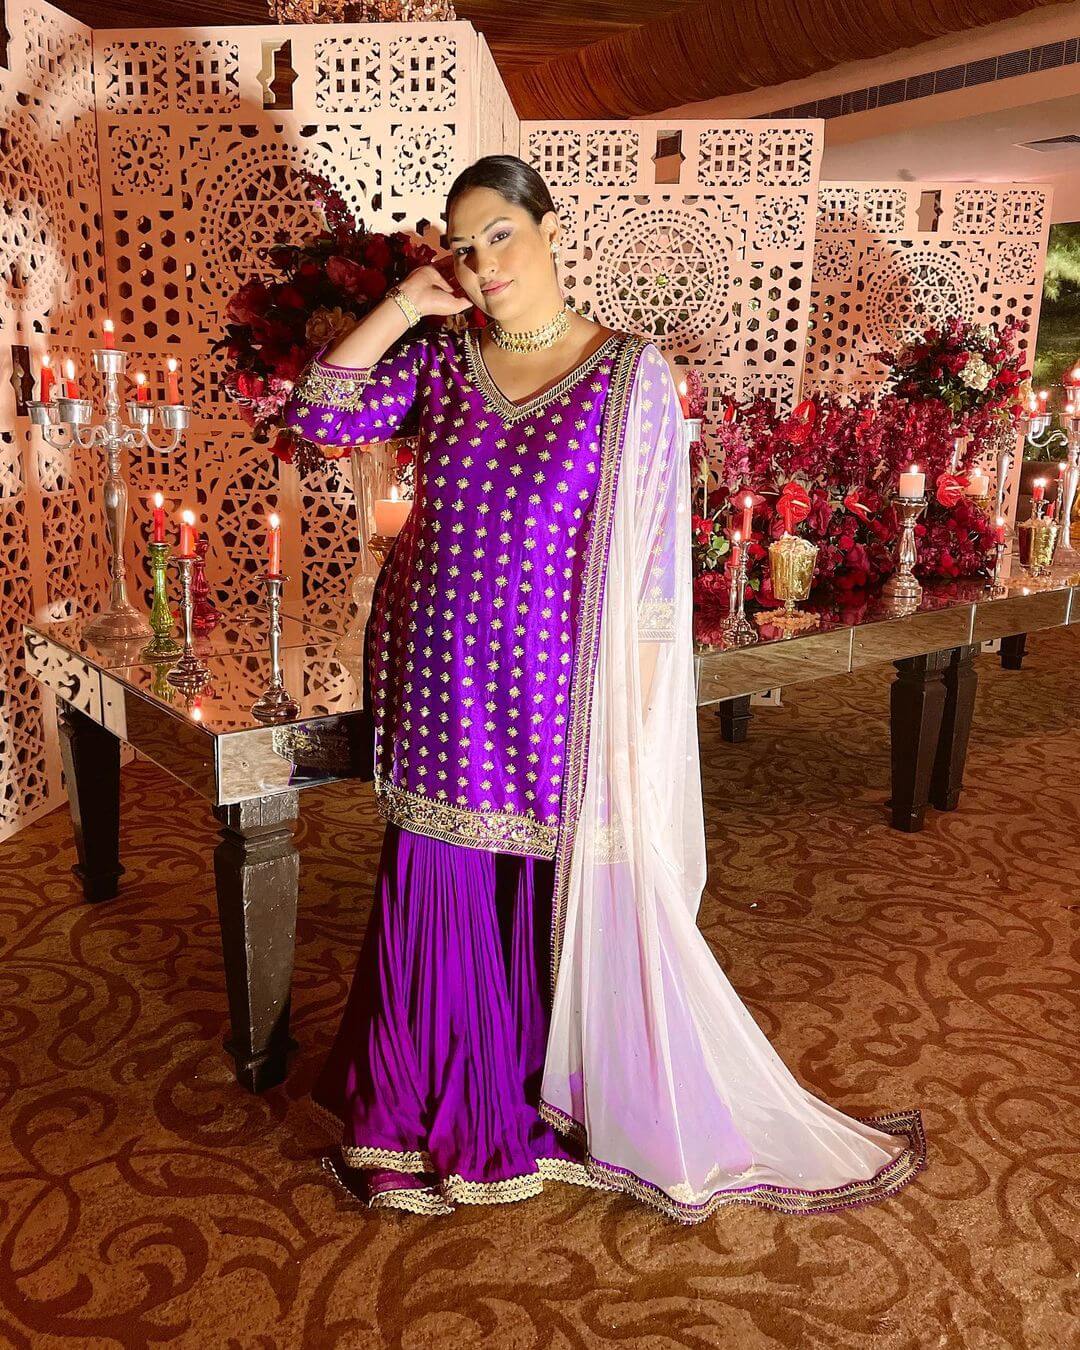 20+ Trending Diwali Outfit Ideas for you to choose from Beautiful Purple Kurti with a skirt for the Diwali Party